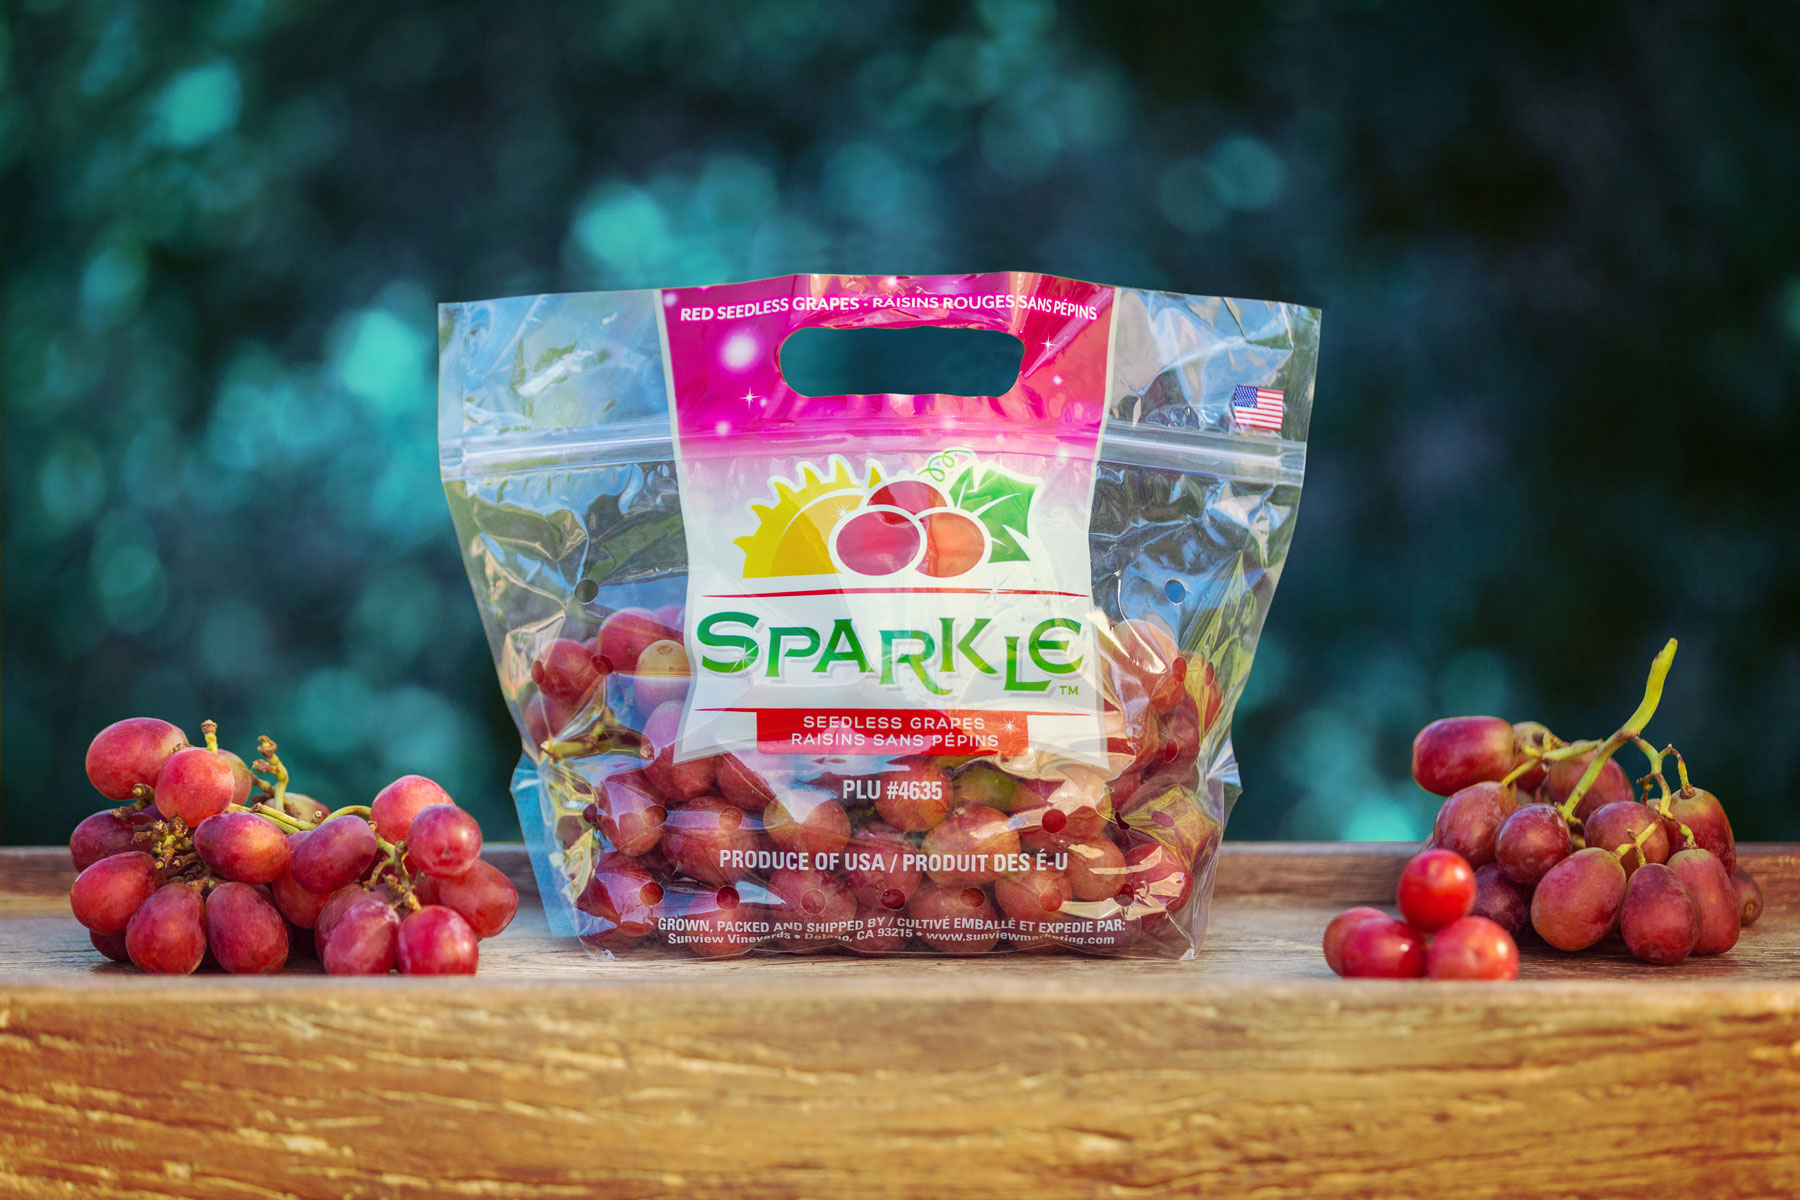 Bag of Sparkle Seedless Grapes